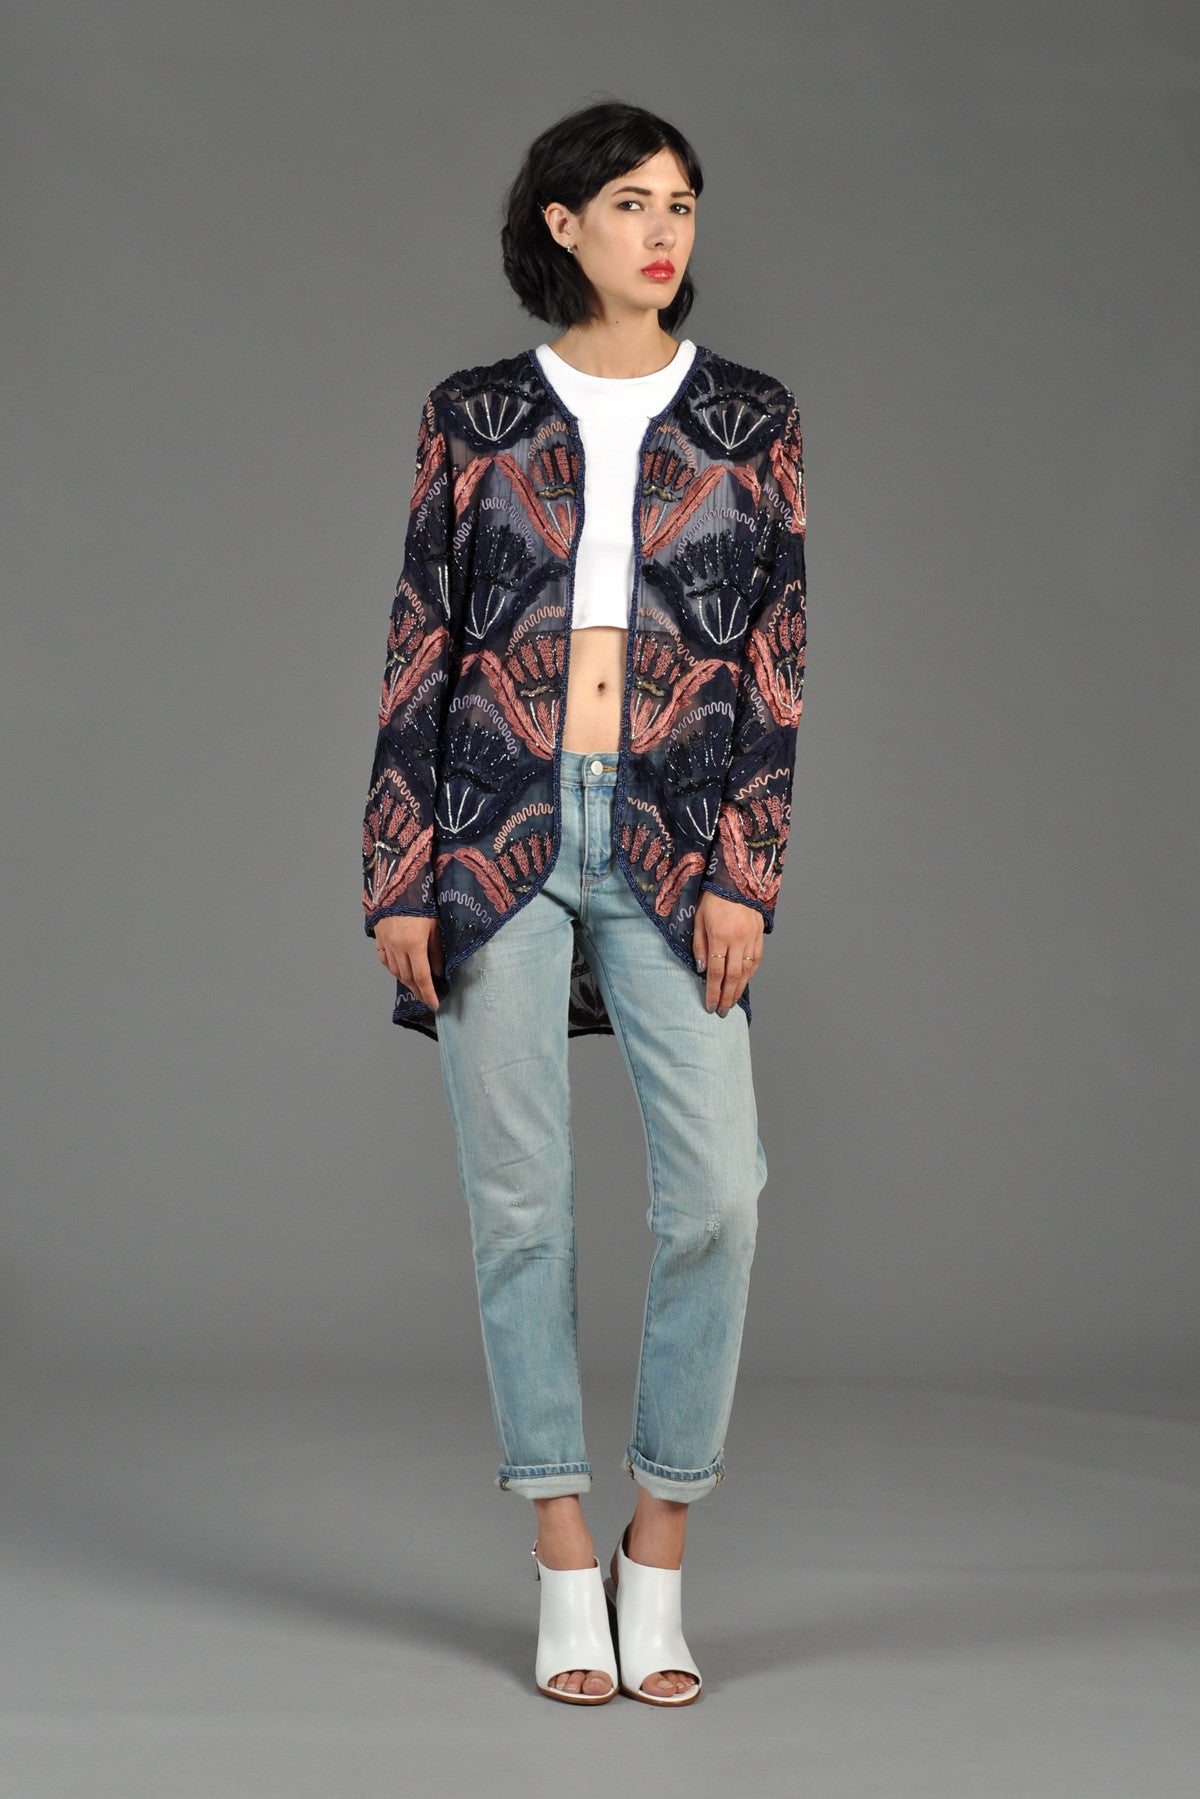 Sheer Silk Embroidered + Beaded Nouveau Jacket